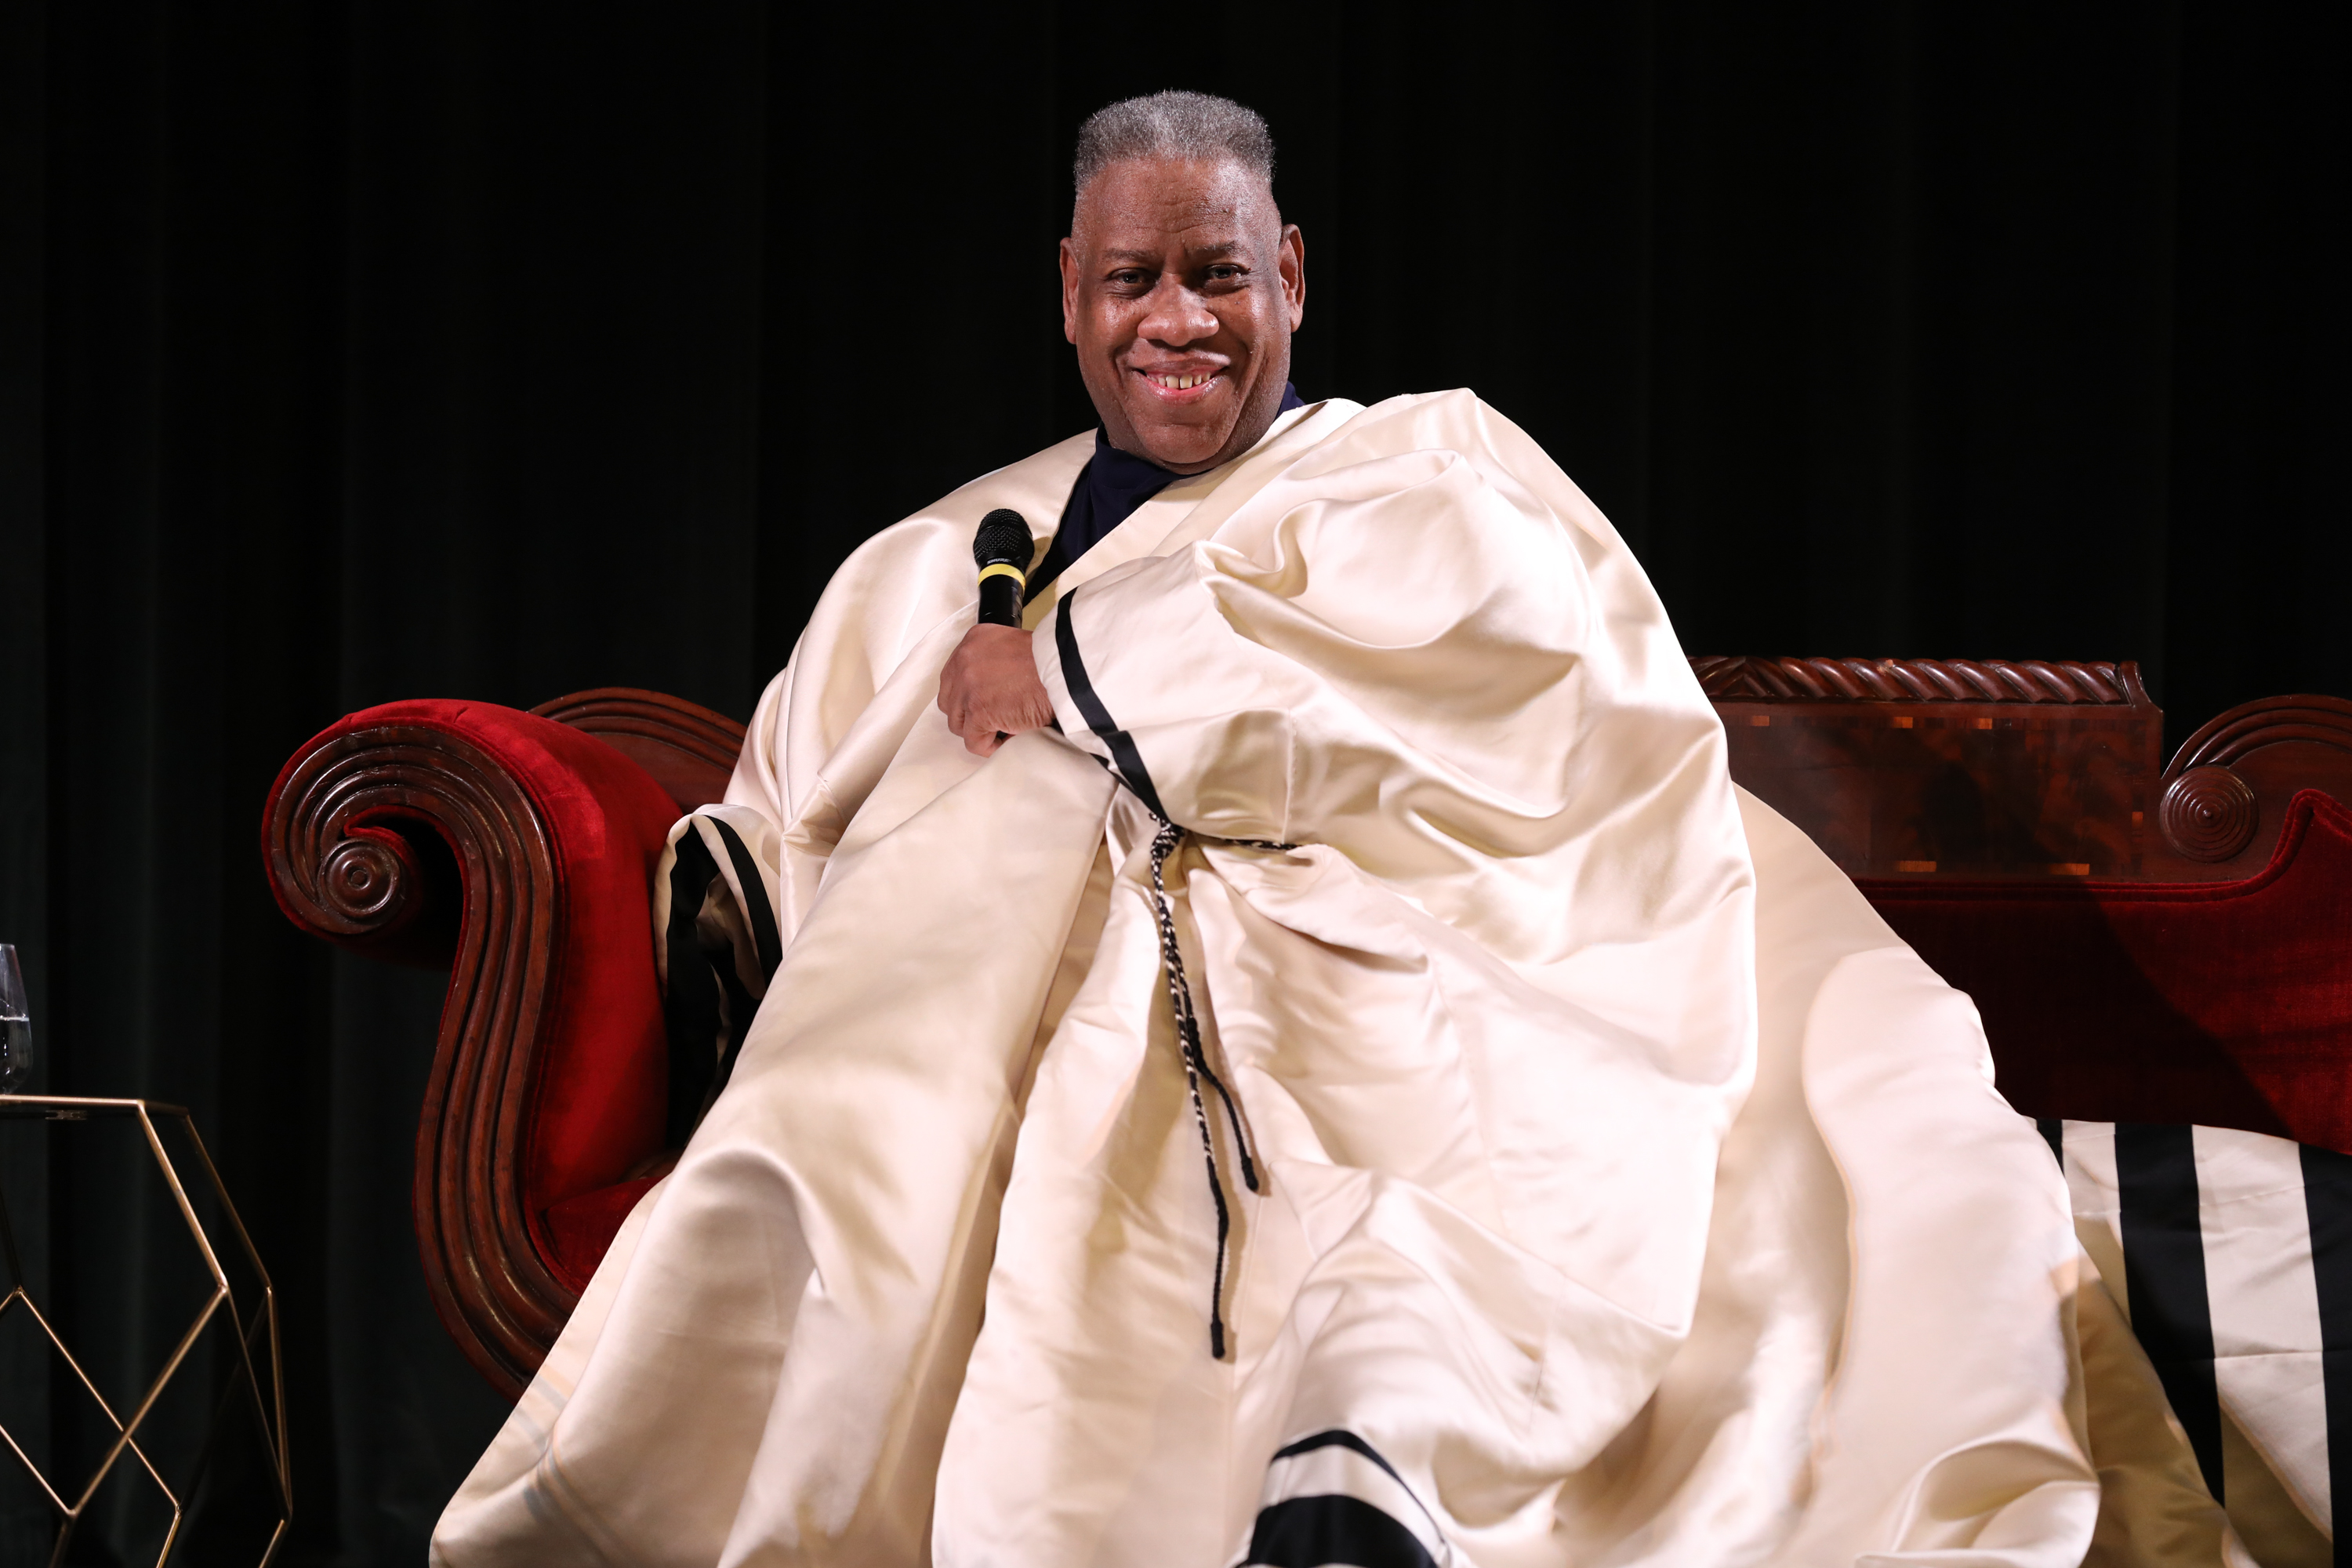 Andre Leon Talley speaks during ‘The Gospel According to Andre’ Q&amp;A during the 21st SCAD Savannah Film Festival on Nov. 2, 2018 in Savannah, Georgia. The fashion journalist and former creative director and American editor-at-large of Vogue magazine has died. He was 73 years old. 